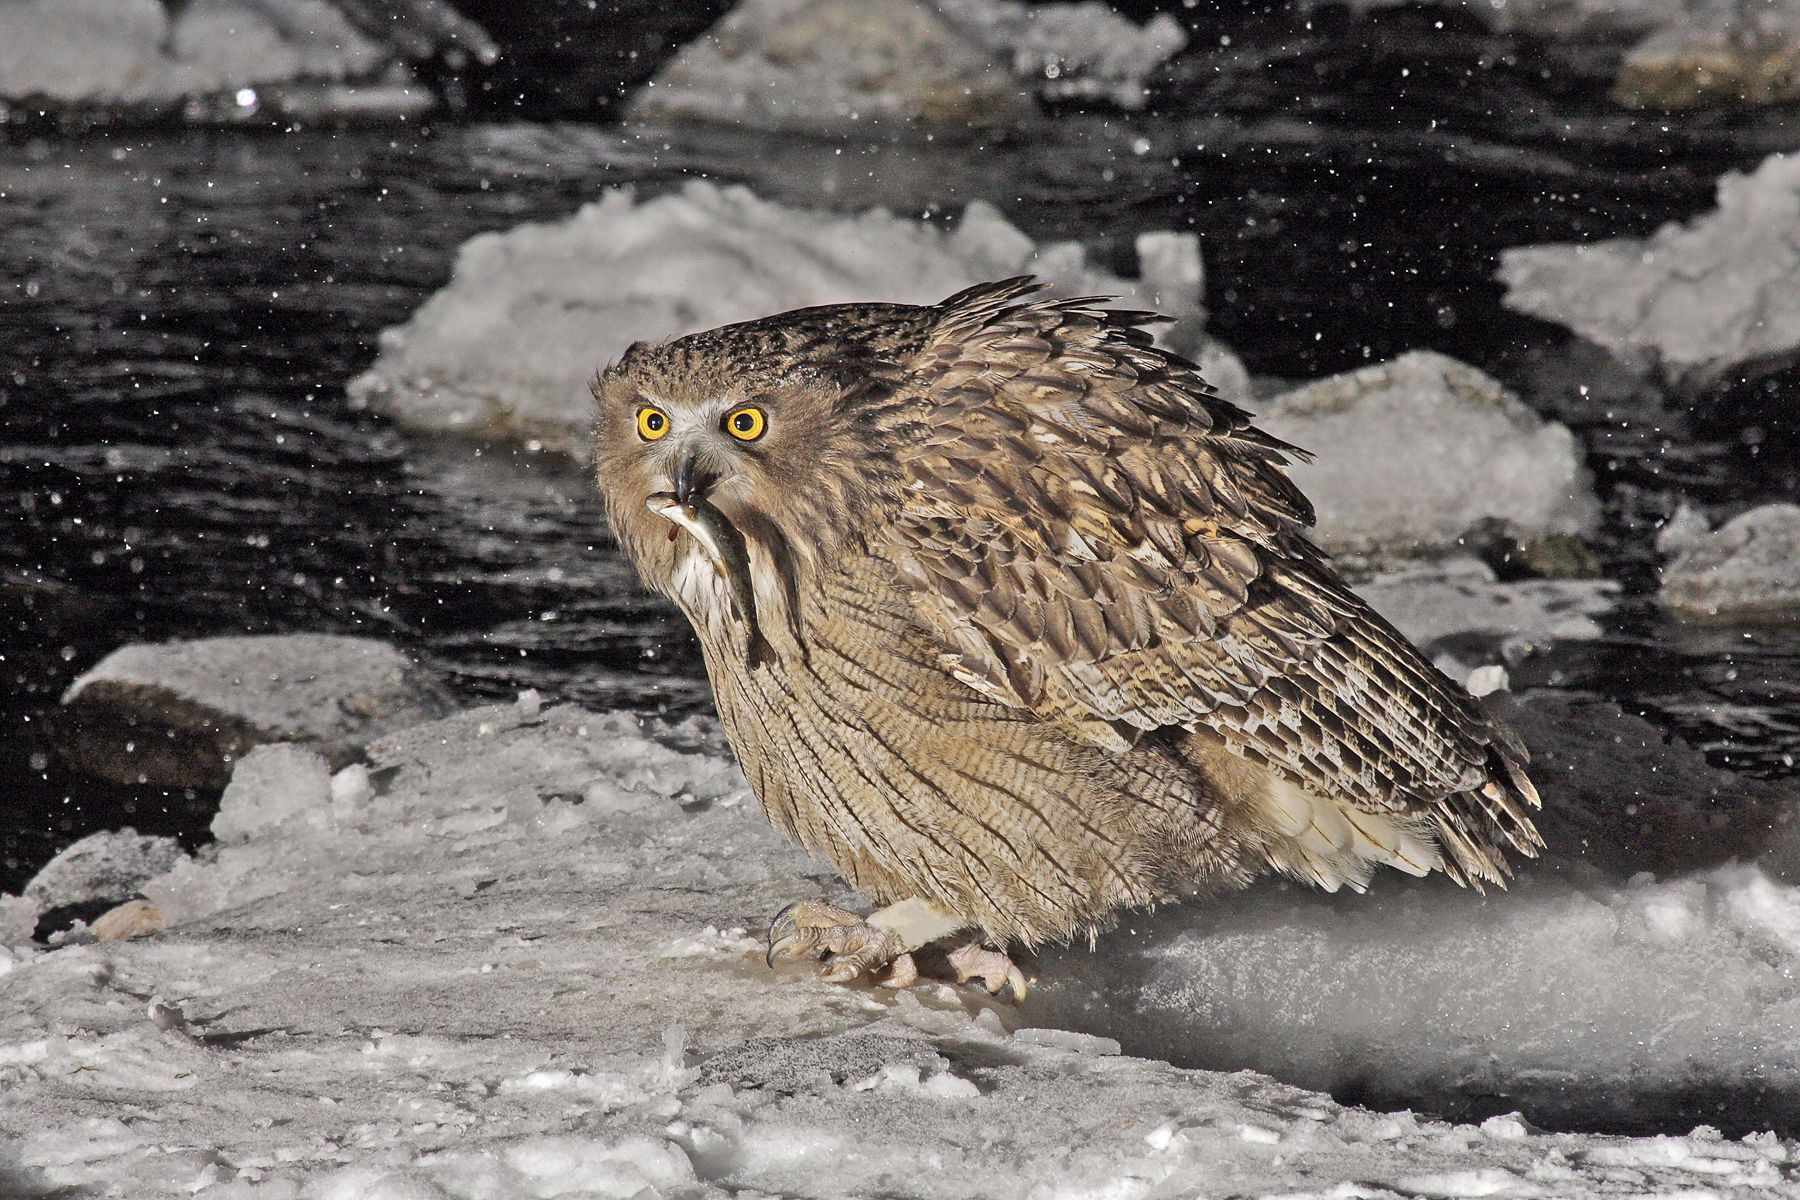 A Blakiston's Fish Owl, the largest owl in the world, with its fish dinner, in northern Japan